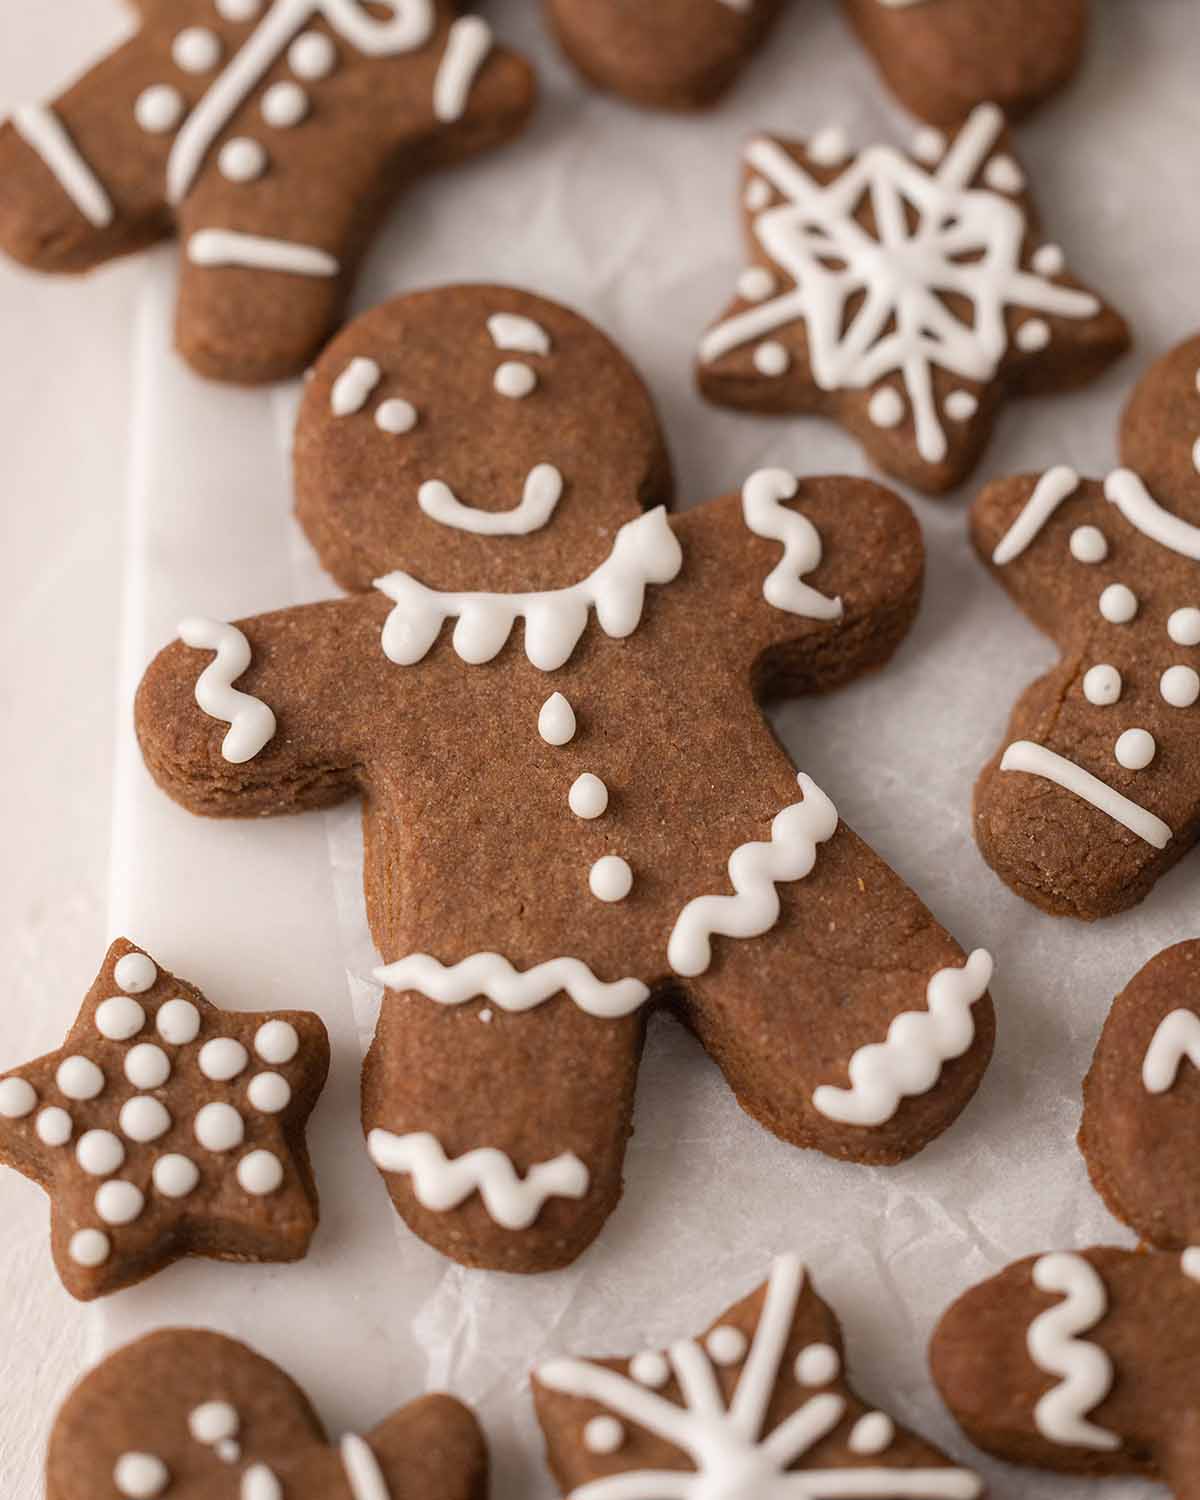 Another example of decorated gingerbread cookie with a happy face.